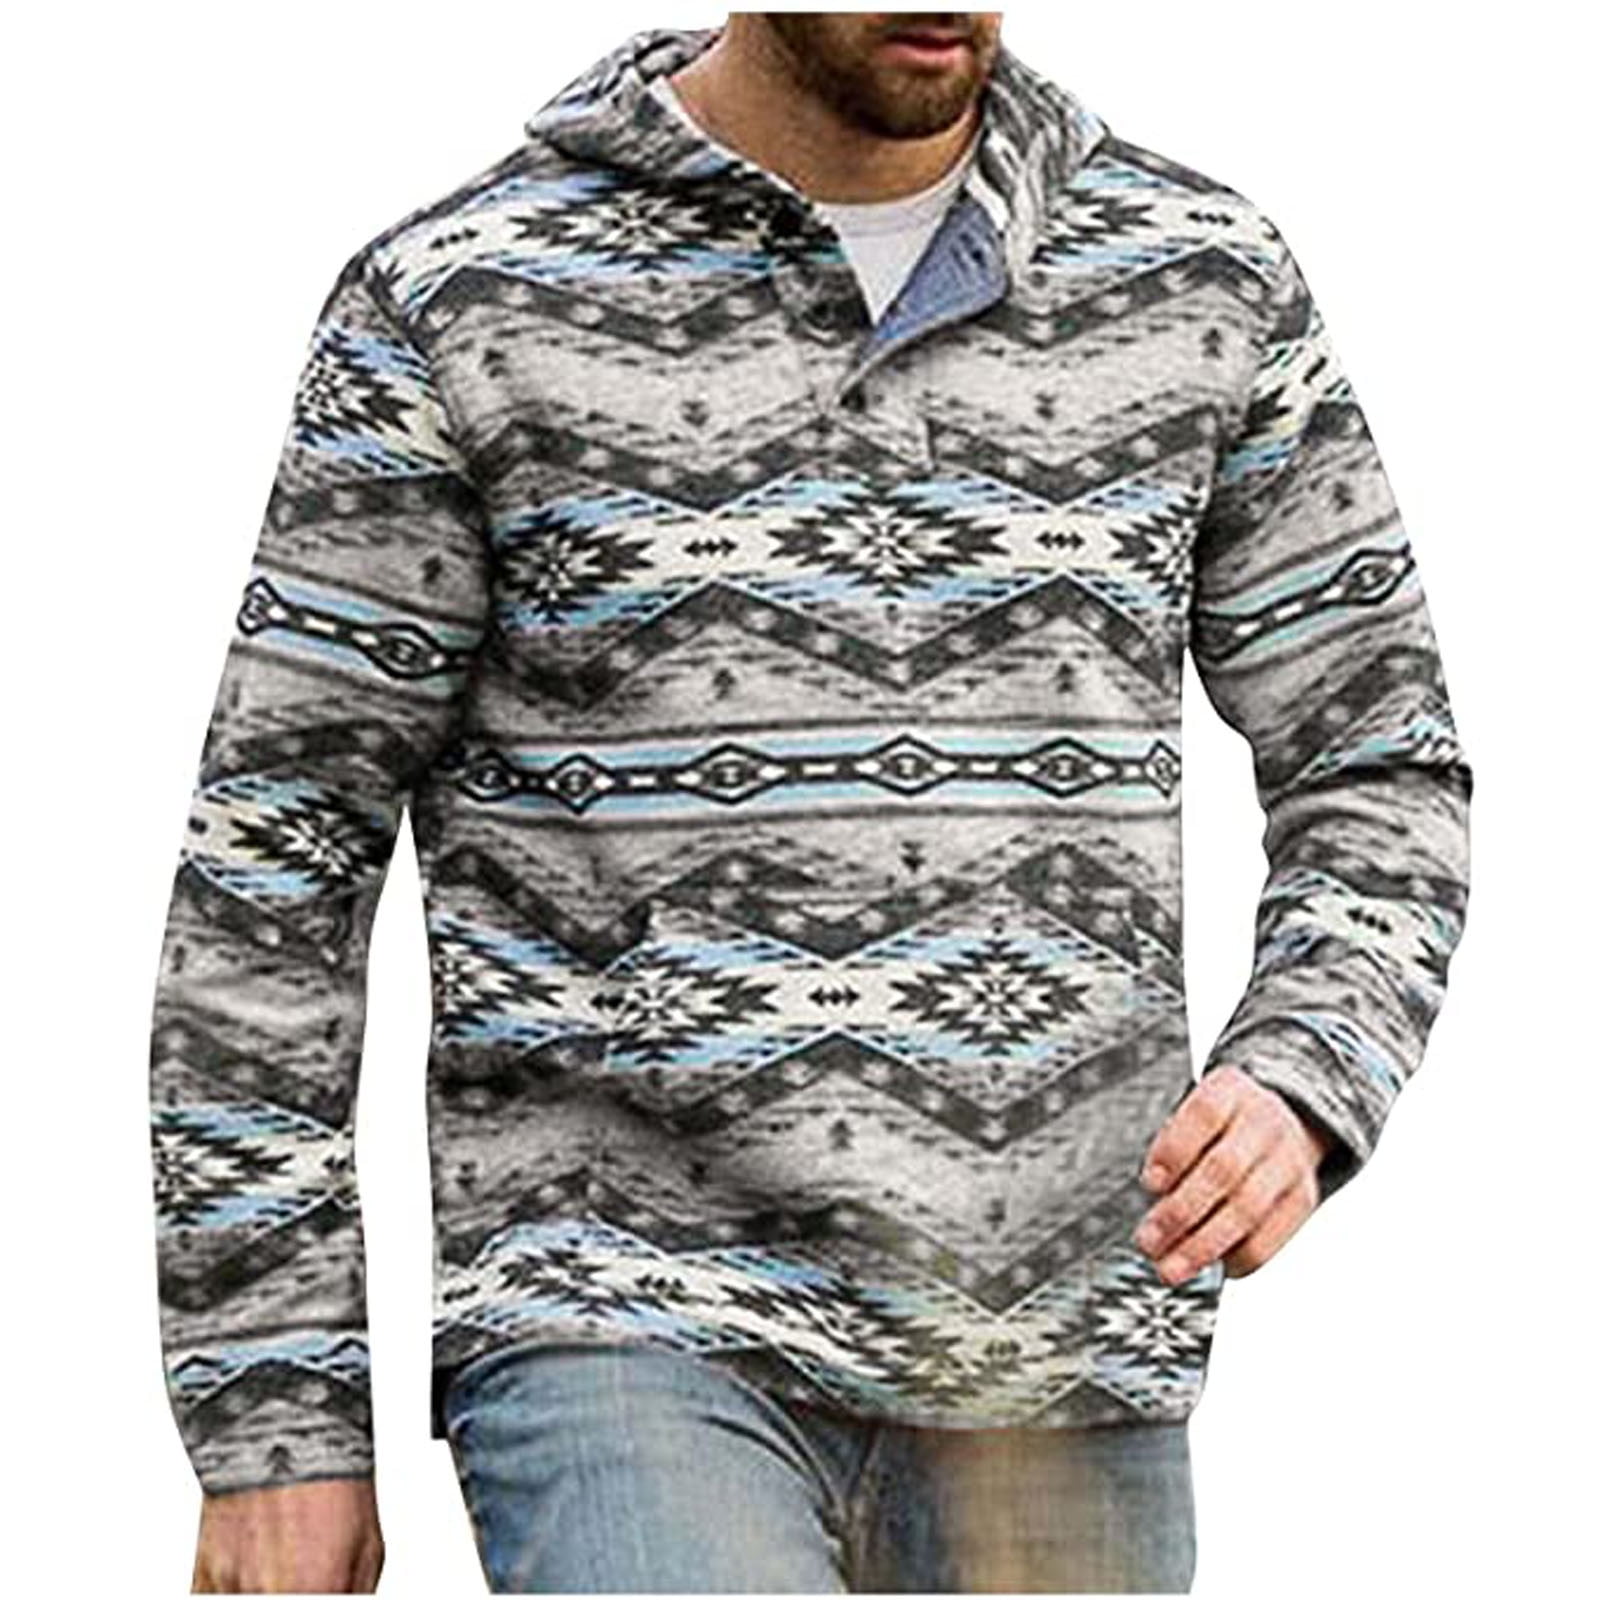 JSGEK Clearance Sweatshirt for Men Casual Stand Collar Pullover Western ...